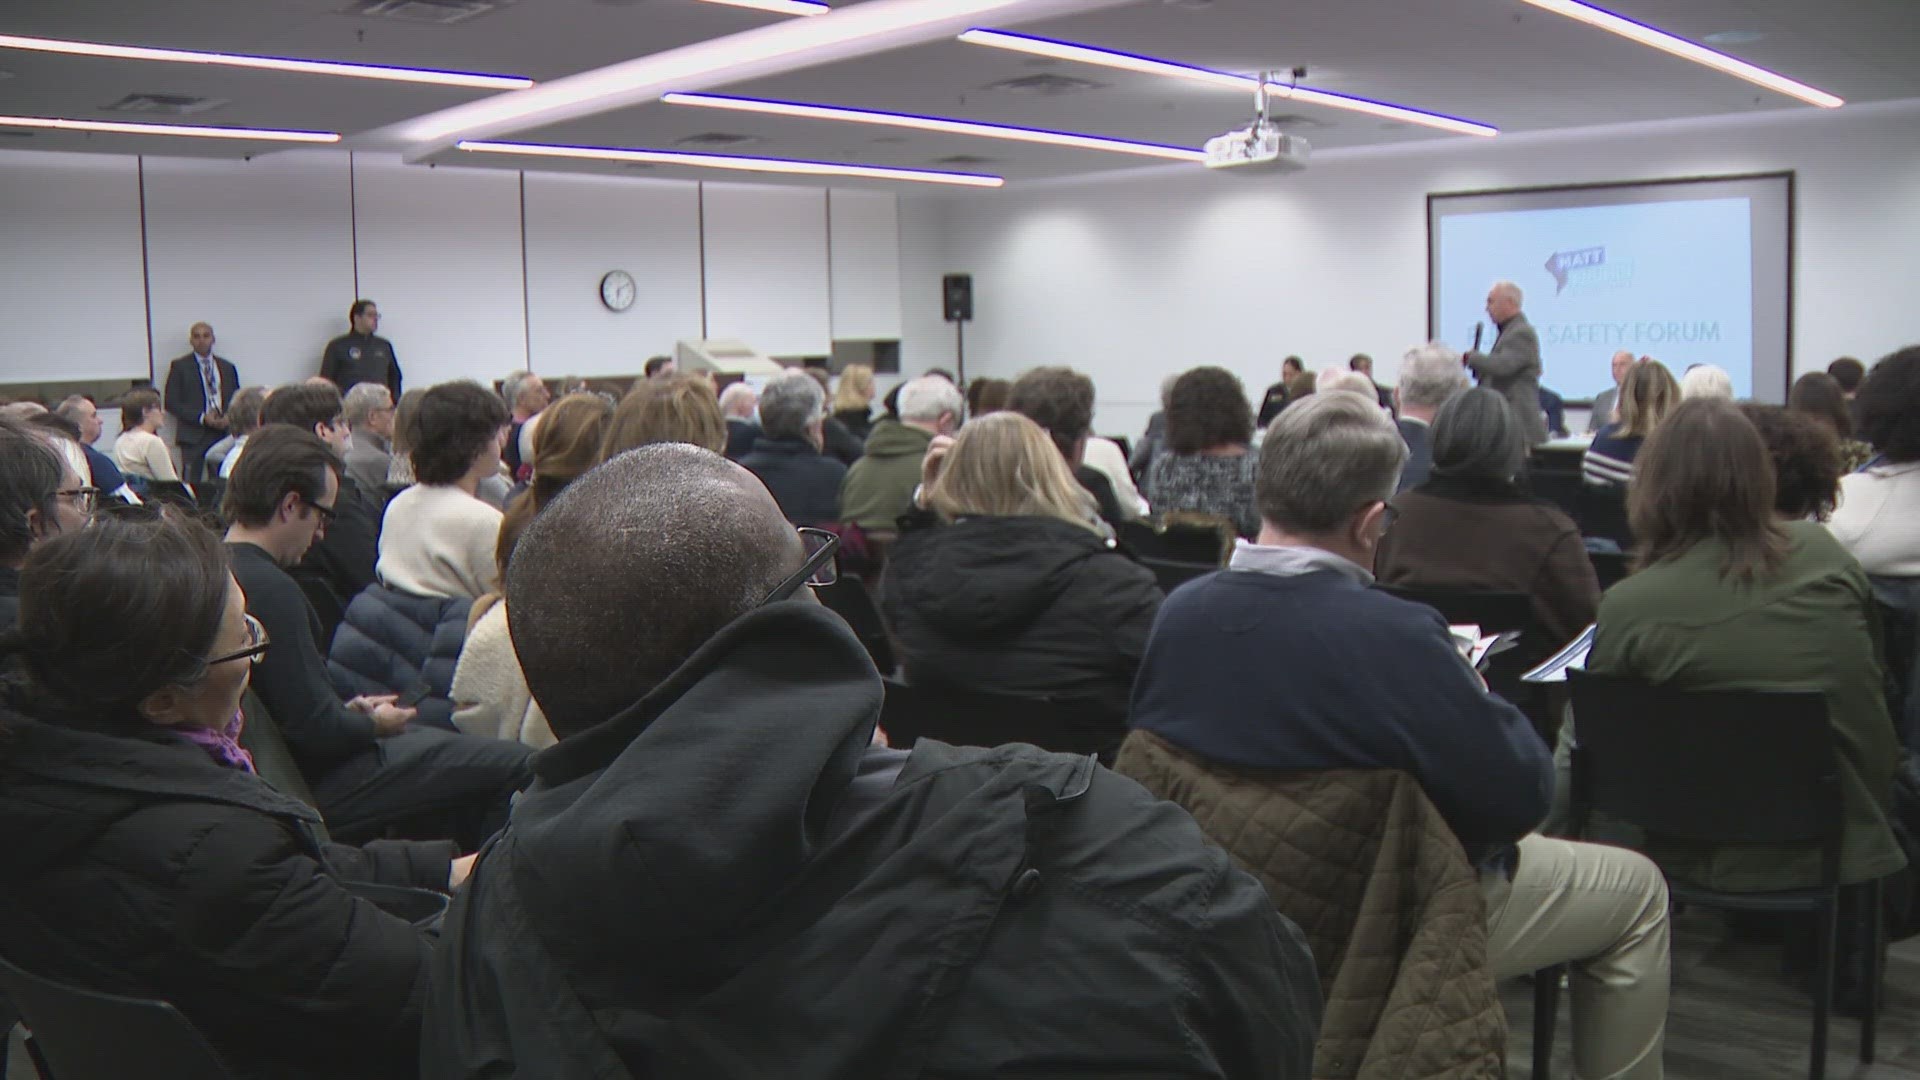 People packed a room at the Cleveland Library in Northwest D.C. with a range of concerns and one focus: Safety.